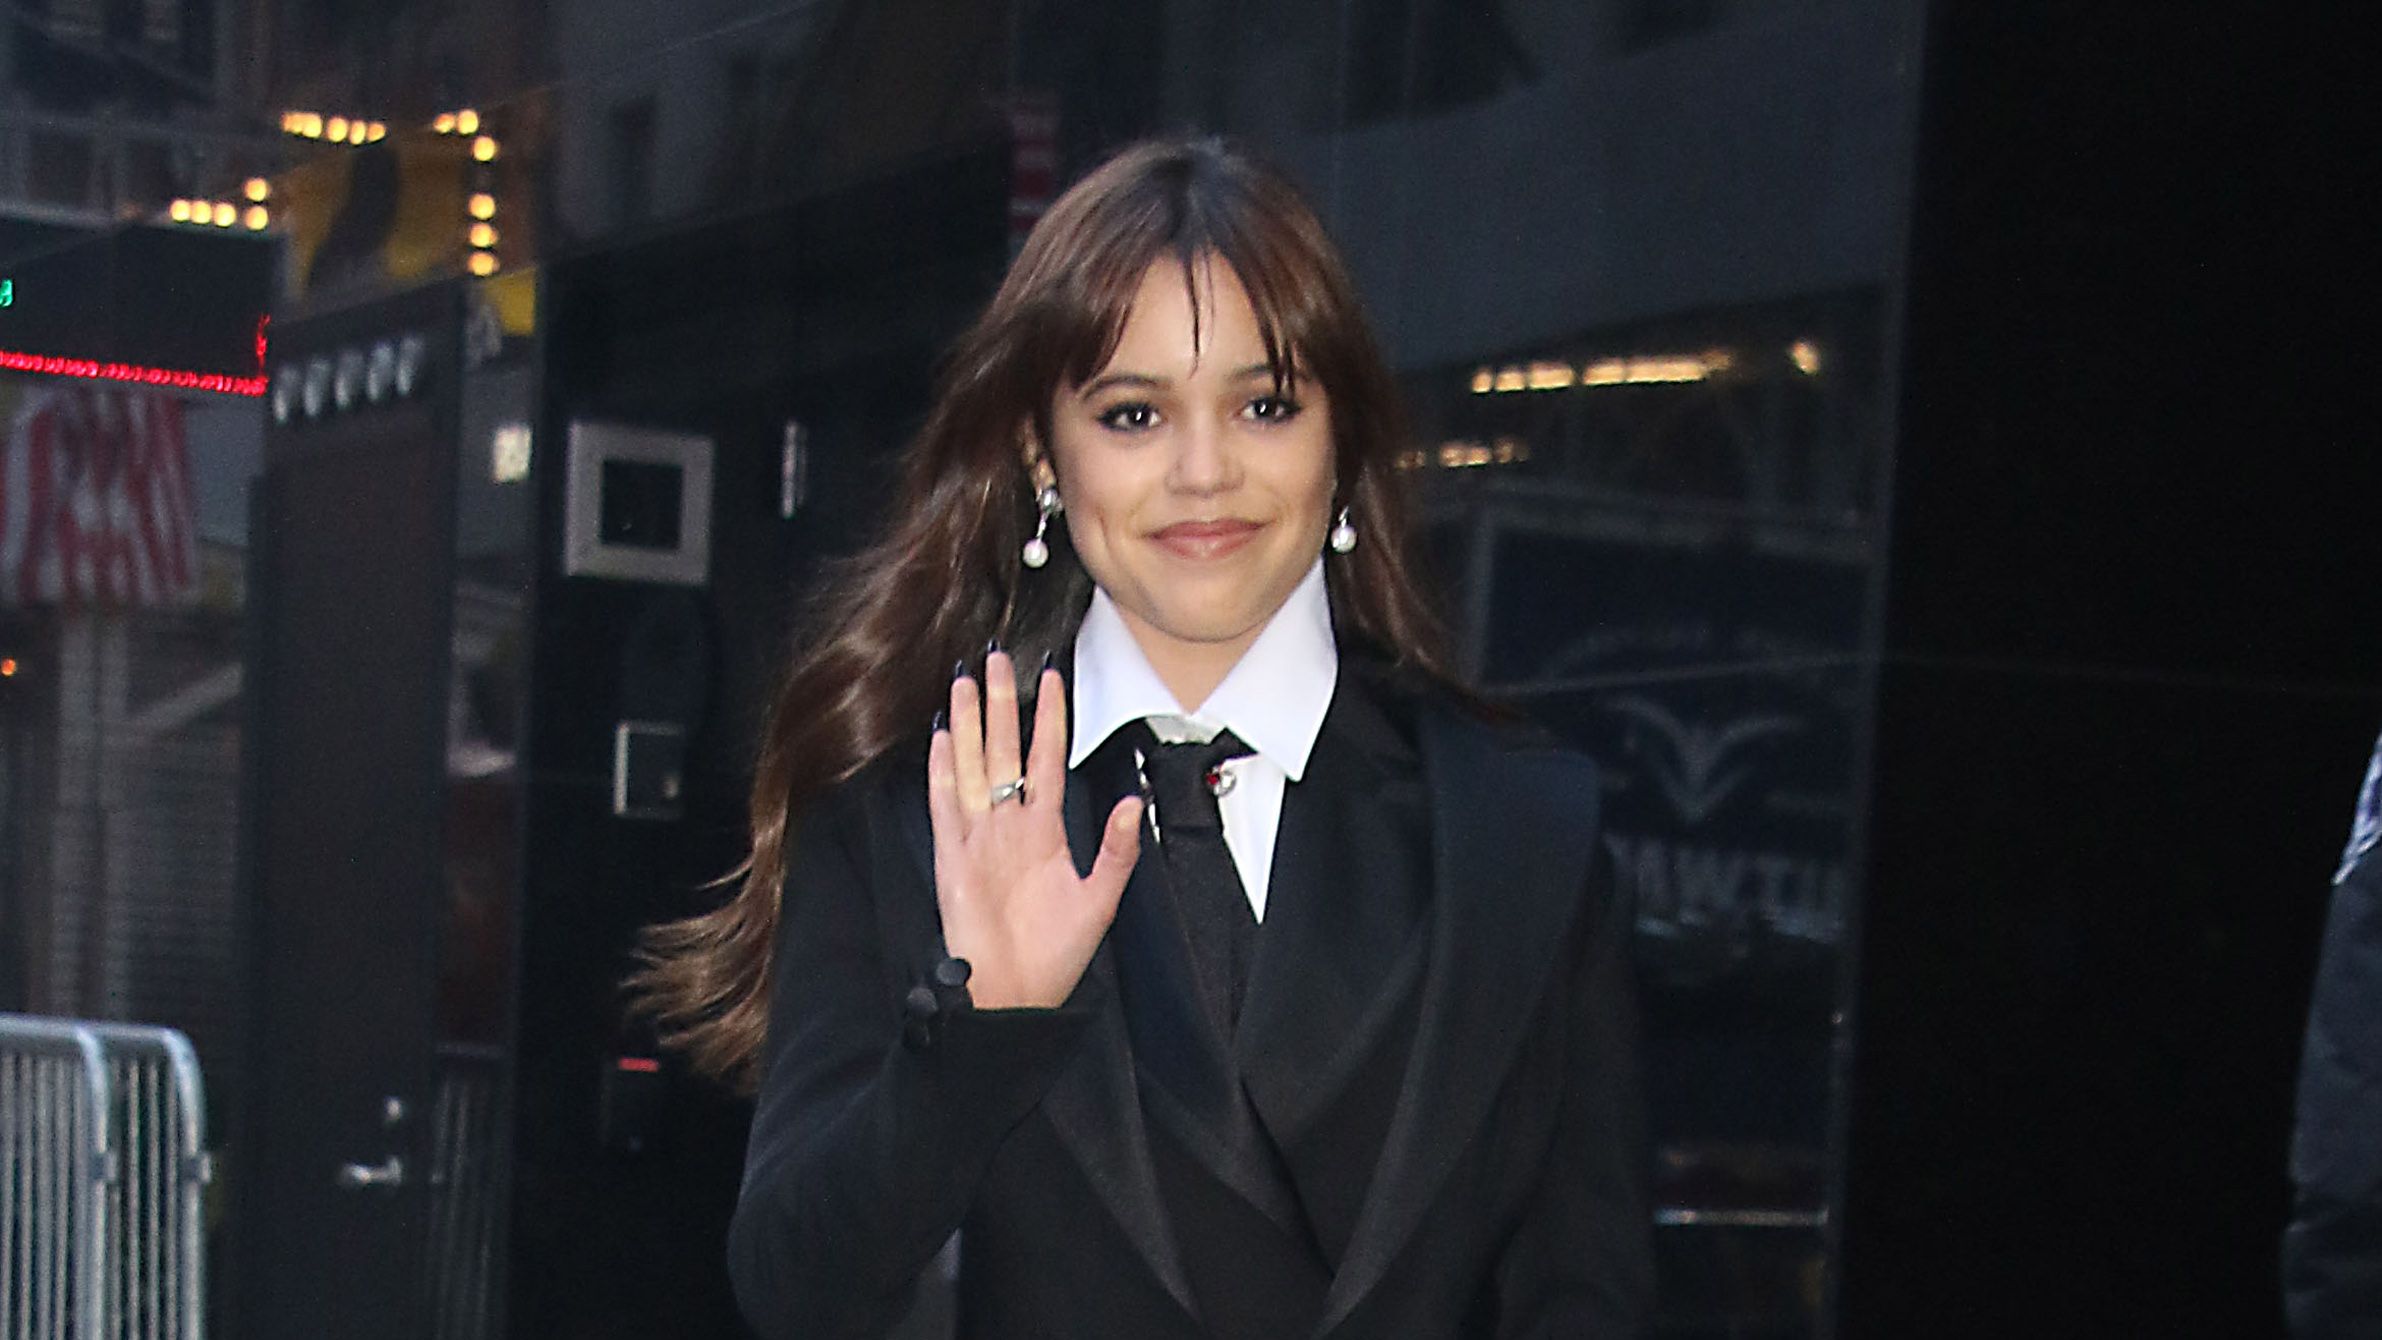 A Moment for Jenna Ortega's Flawless Goth-Glam Press Tour Looks